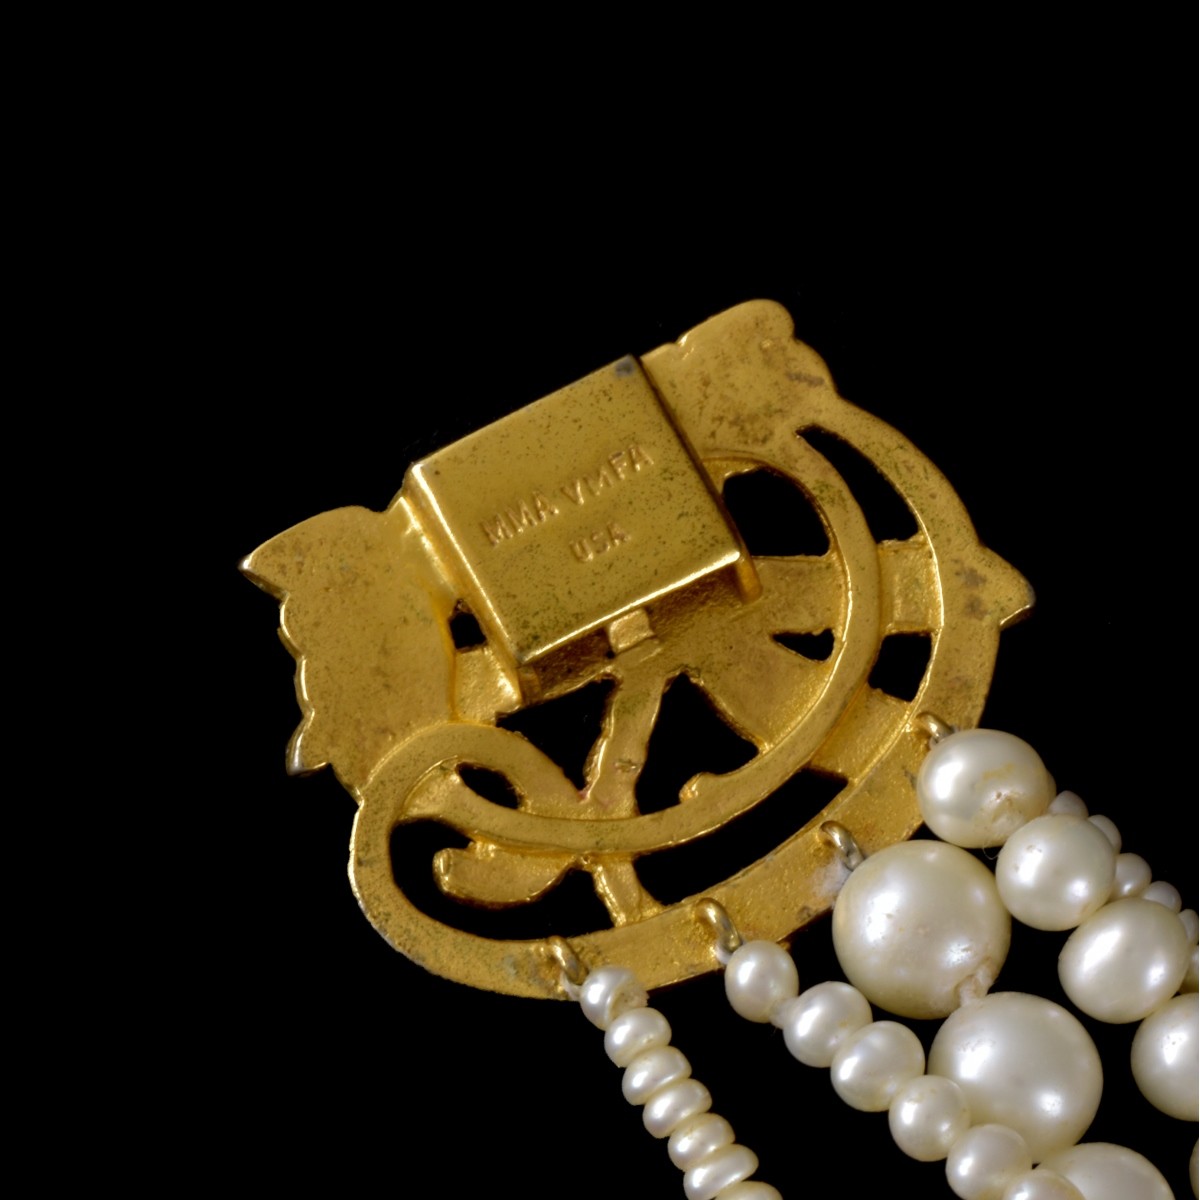 MMA Pearl and Enamel Necklace